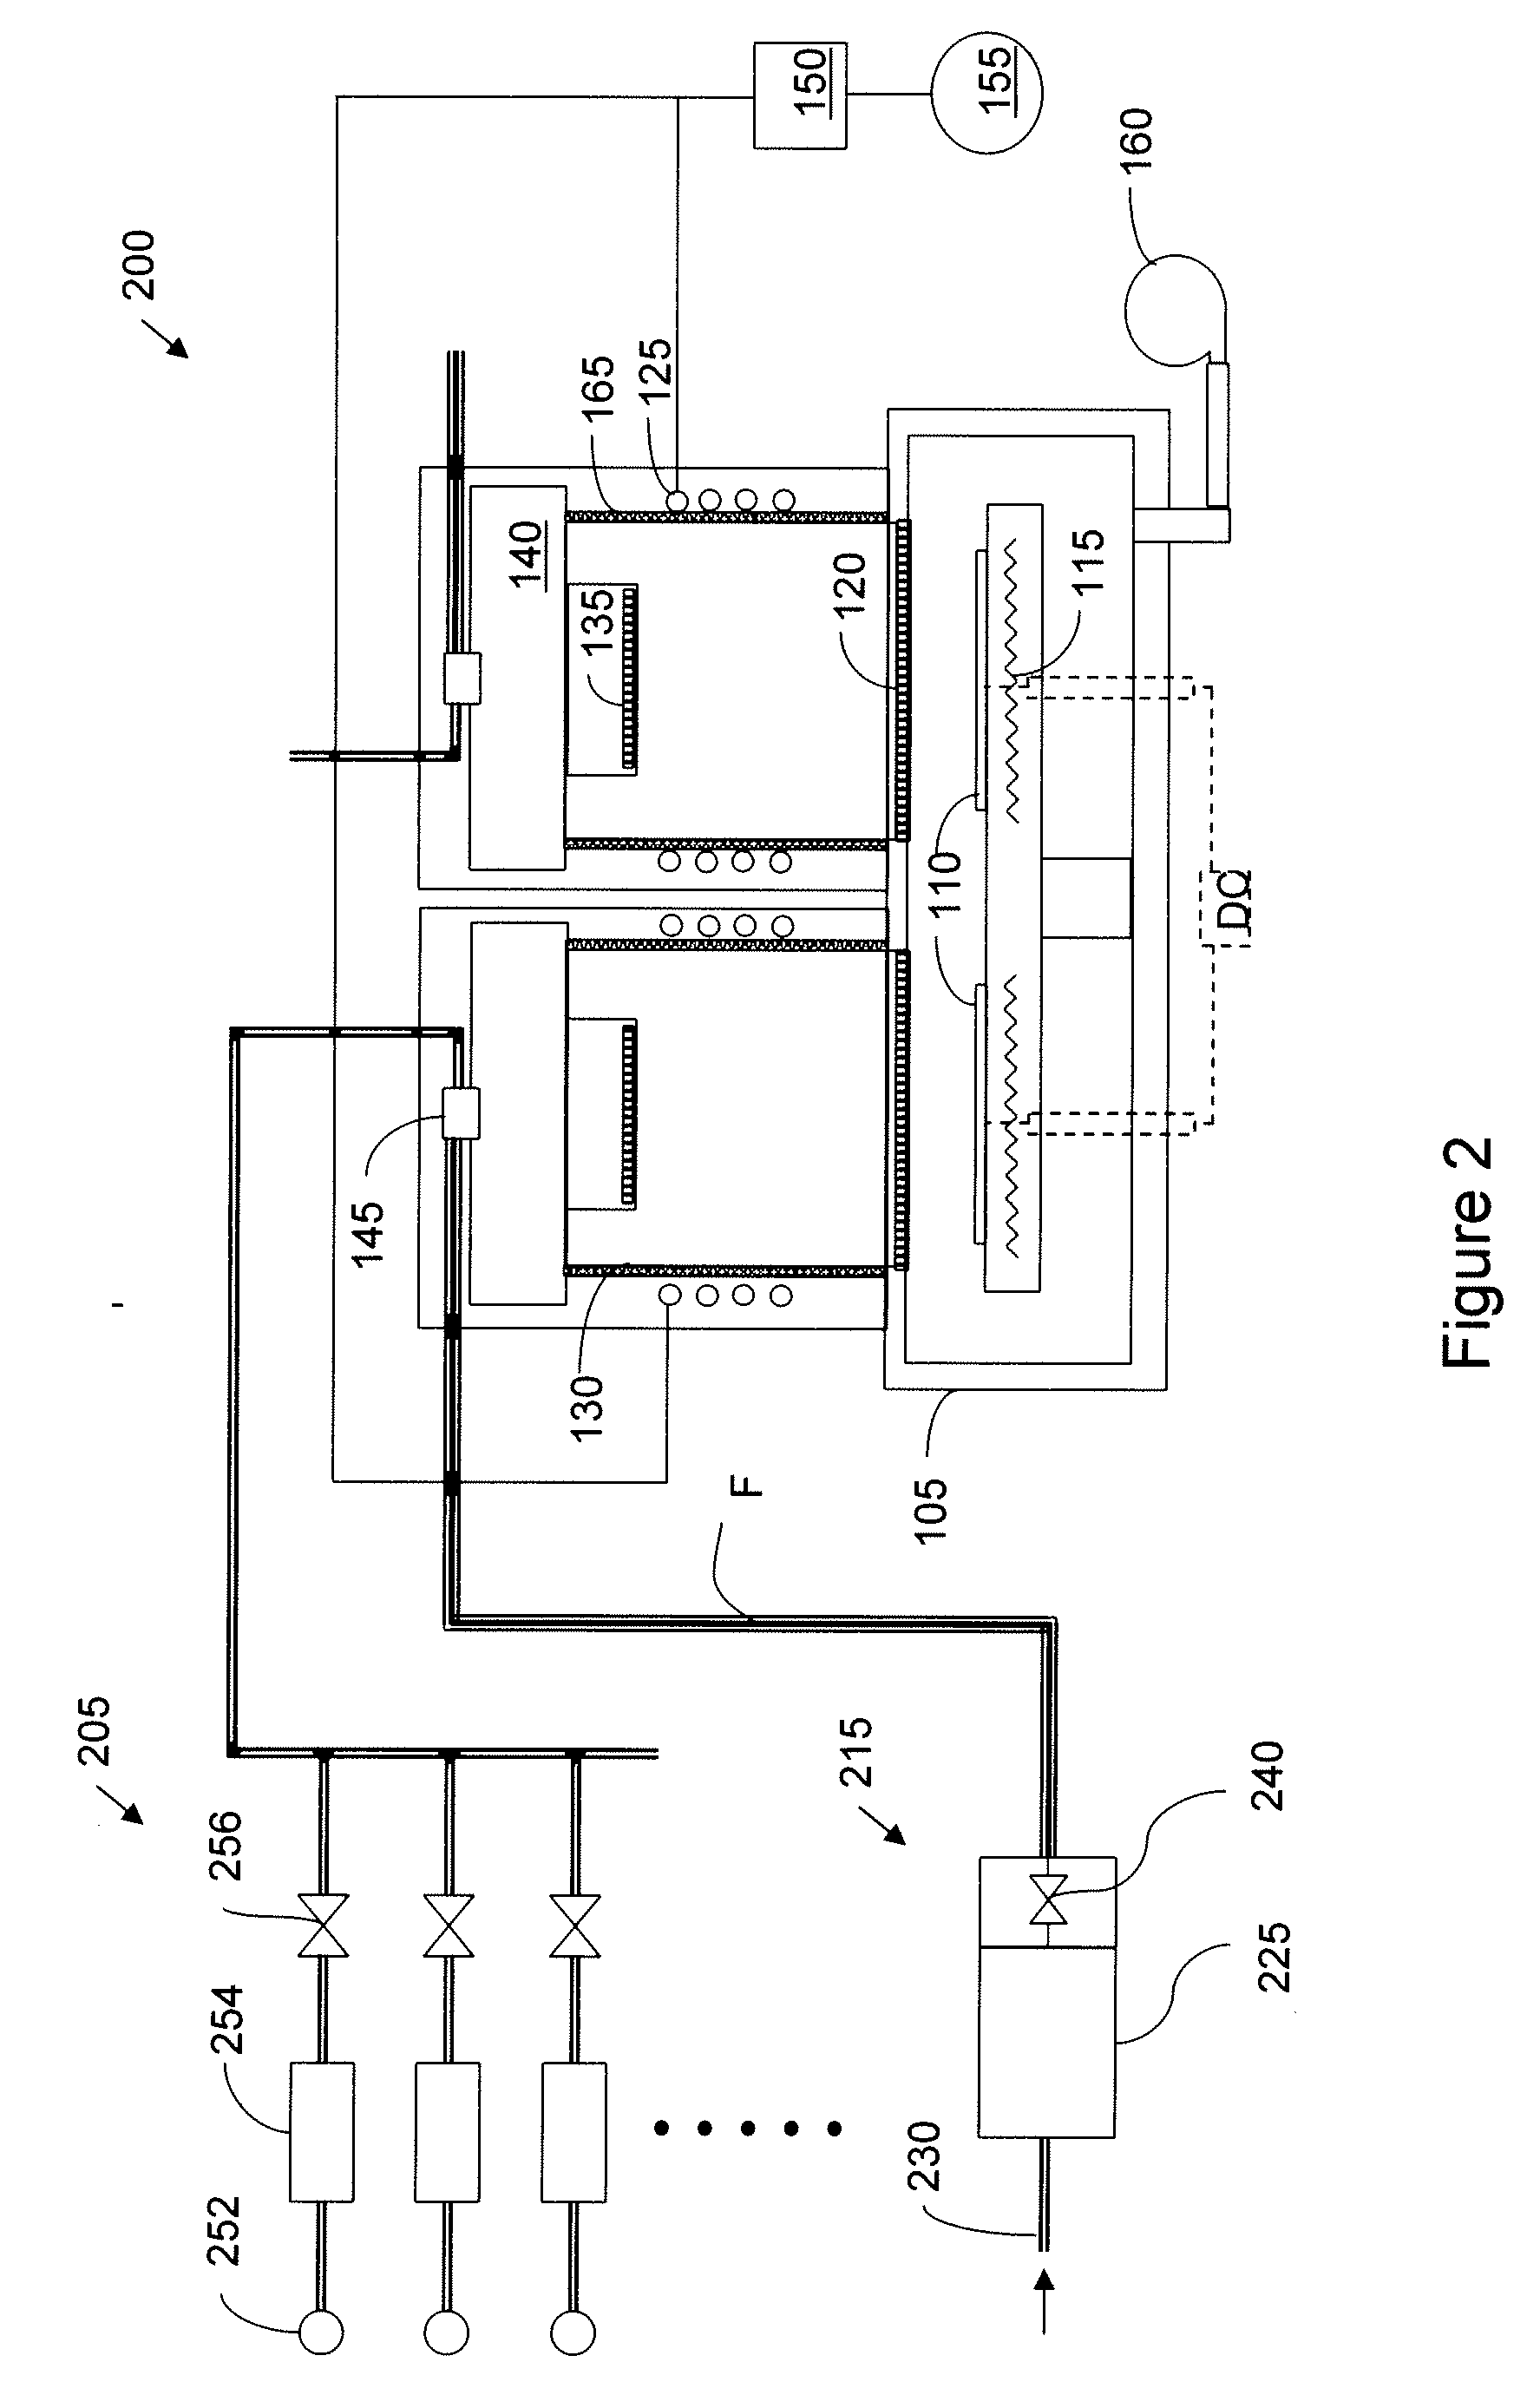 Method and apparatus for growing thin oxide films on silicon while minimizing impact on existing structures